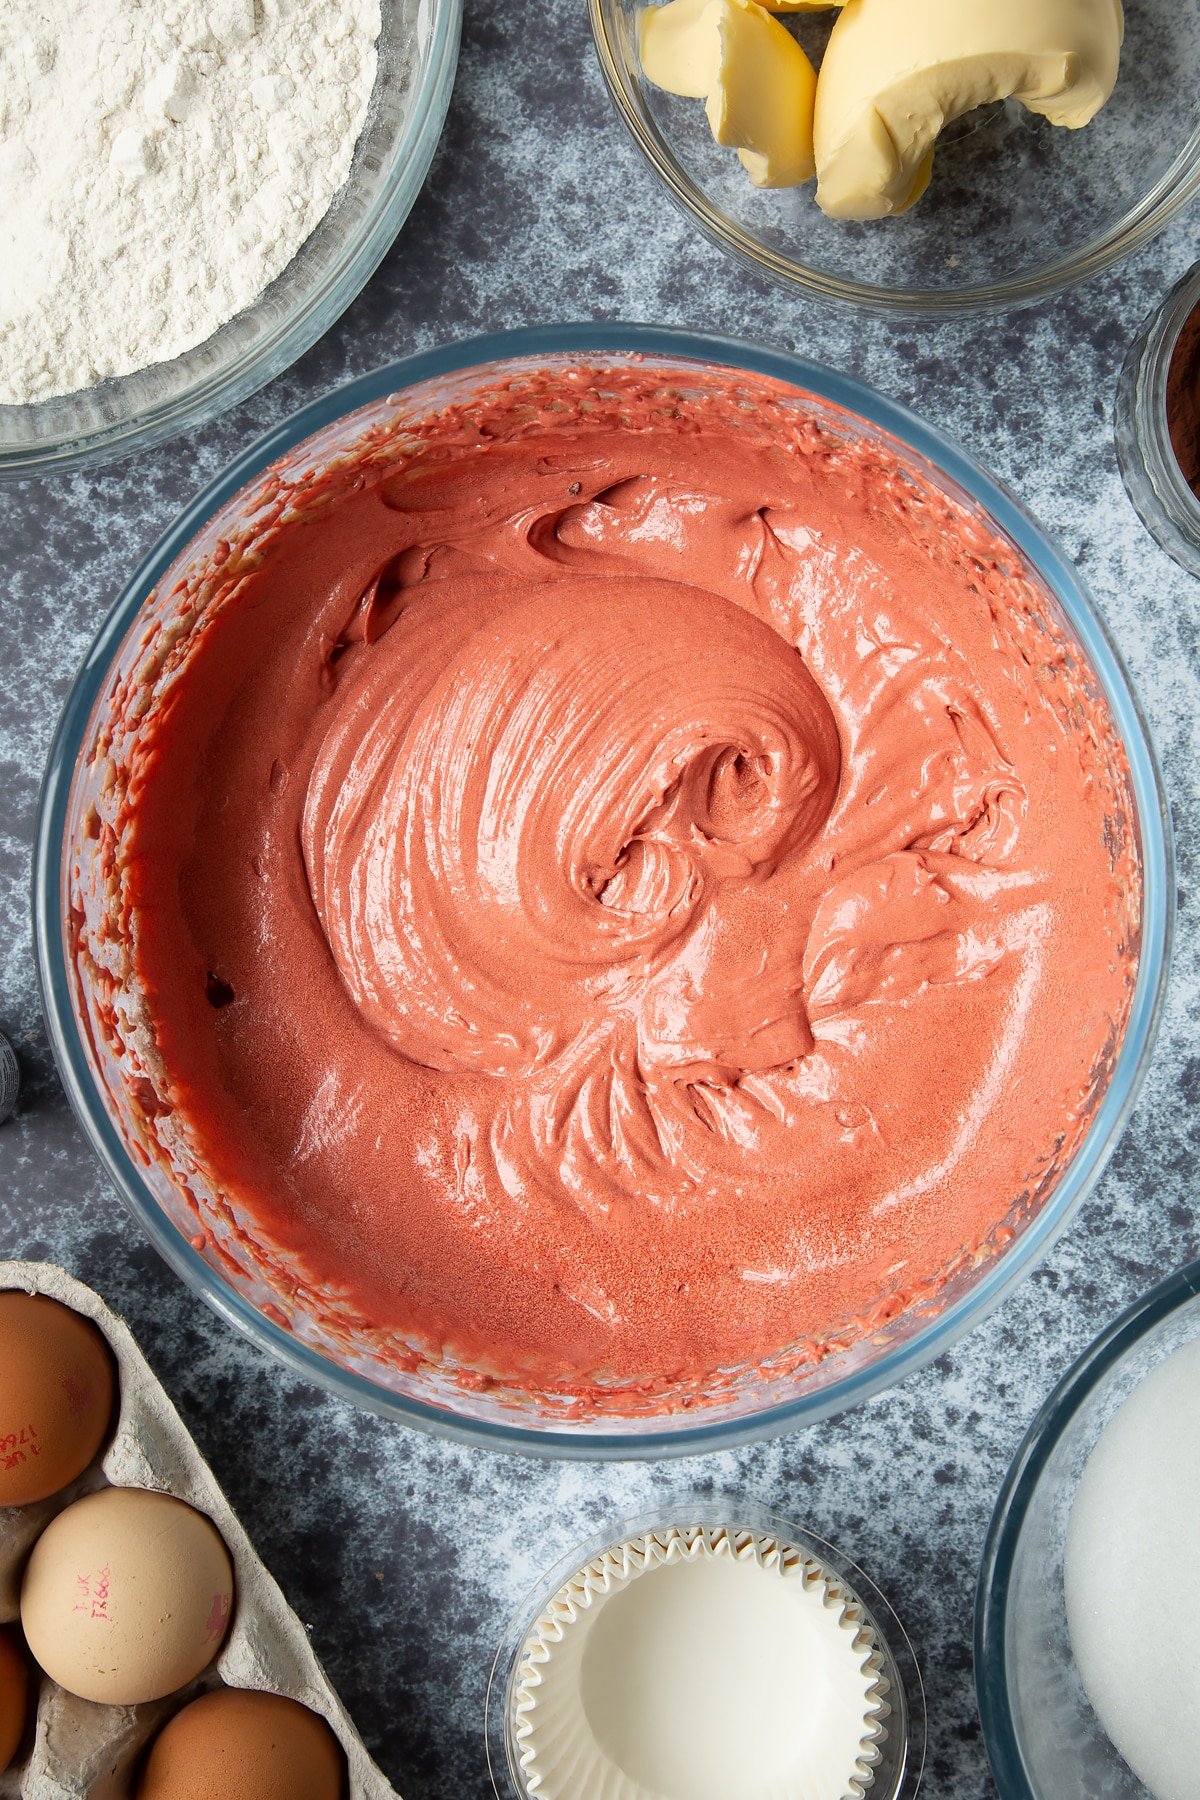 Dairy free red velvet cupcake batter and red food colouring in a large mixing bowl. Ingredients to make dairy free Halloween cupcakes surround the bowl.